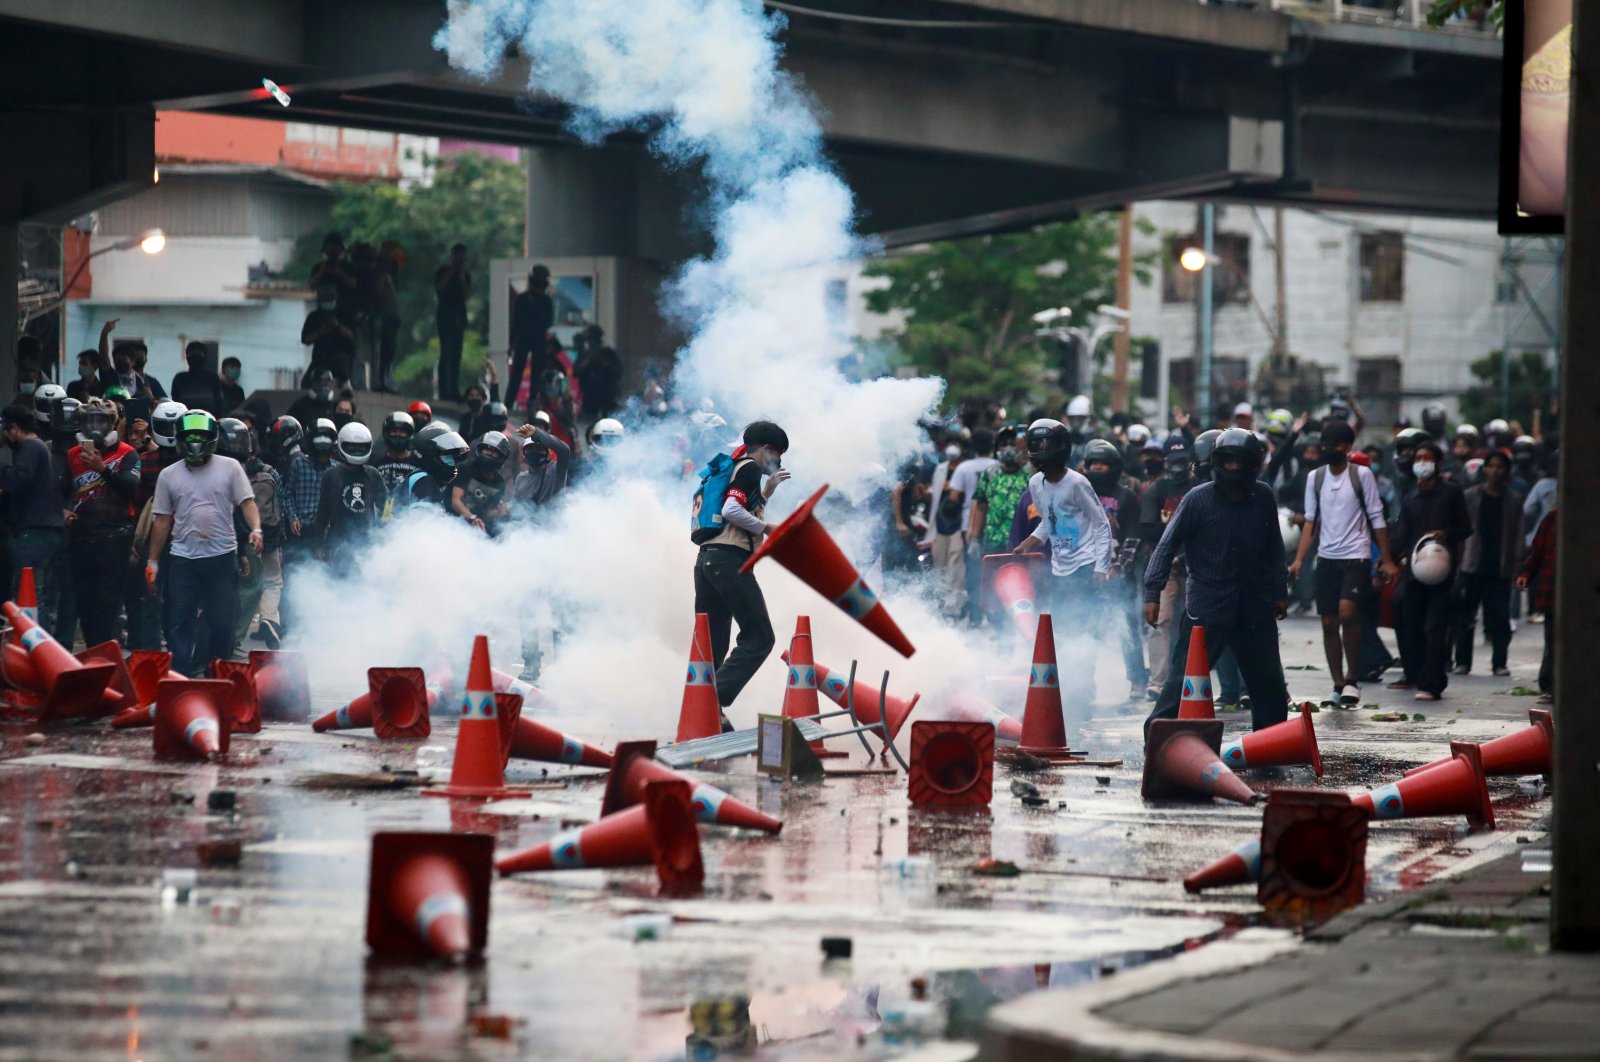 Demonstrators clash with police during a protest against the government's handling of the COVID-19 pandemic, in Bangkok, Thailand, Aug. 10, 2021. (REUTERS Photo)